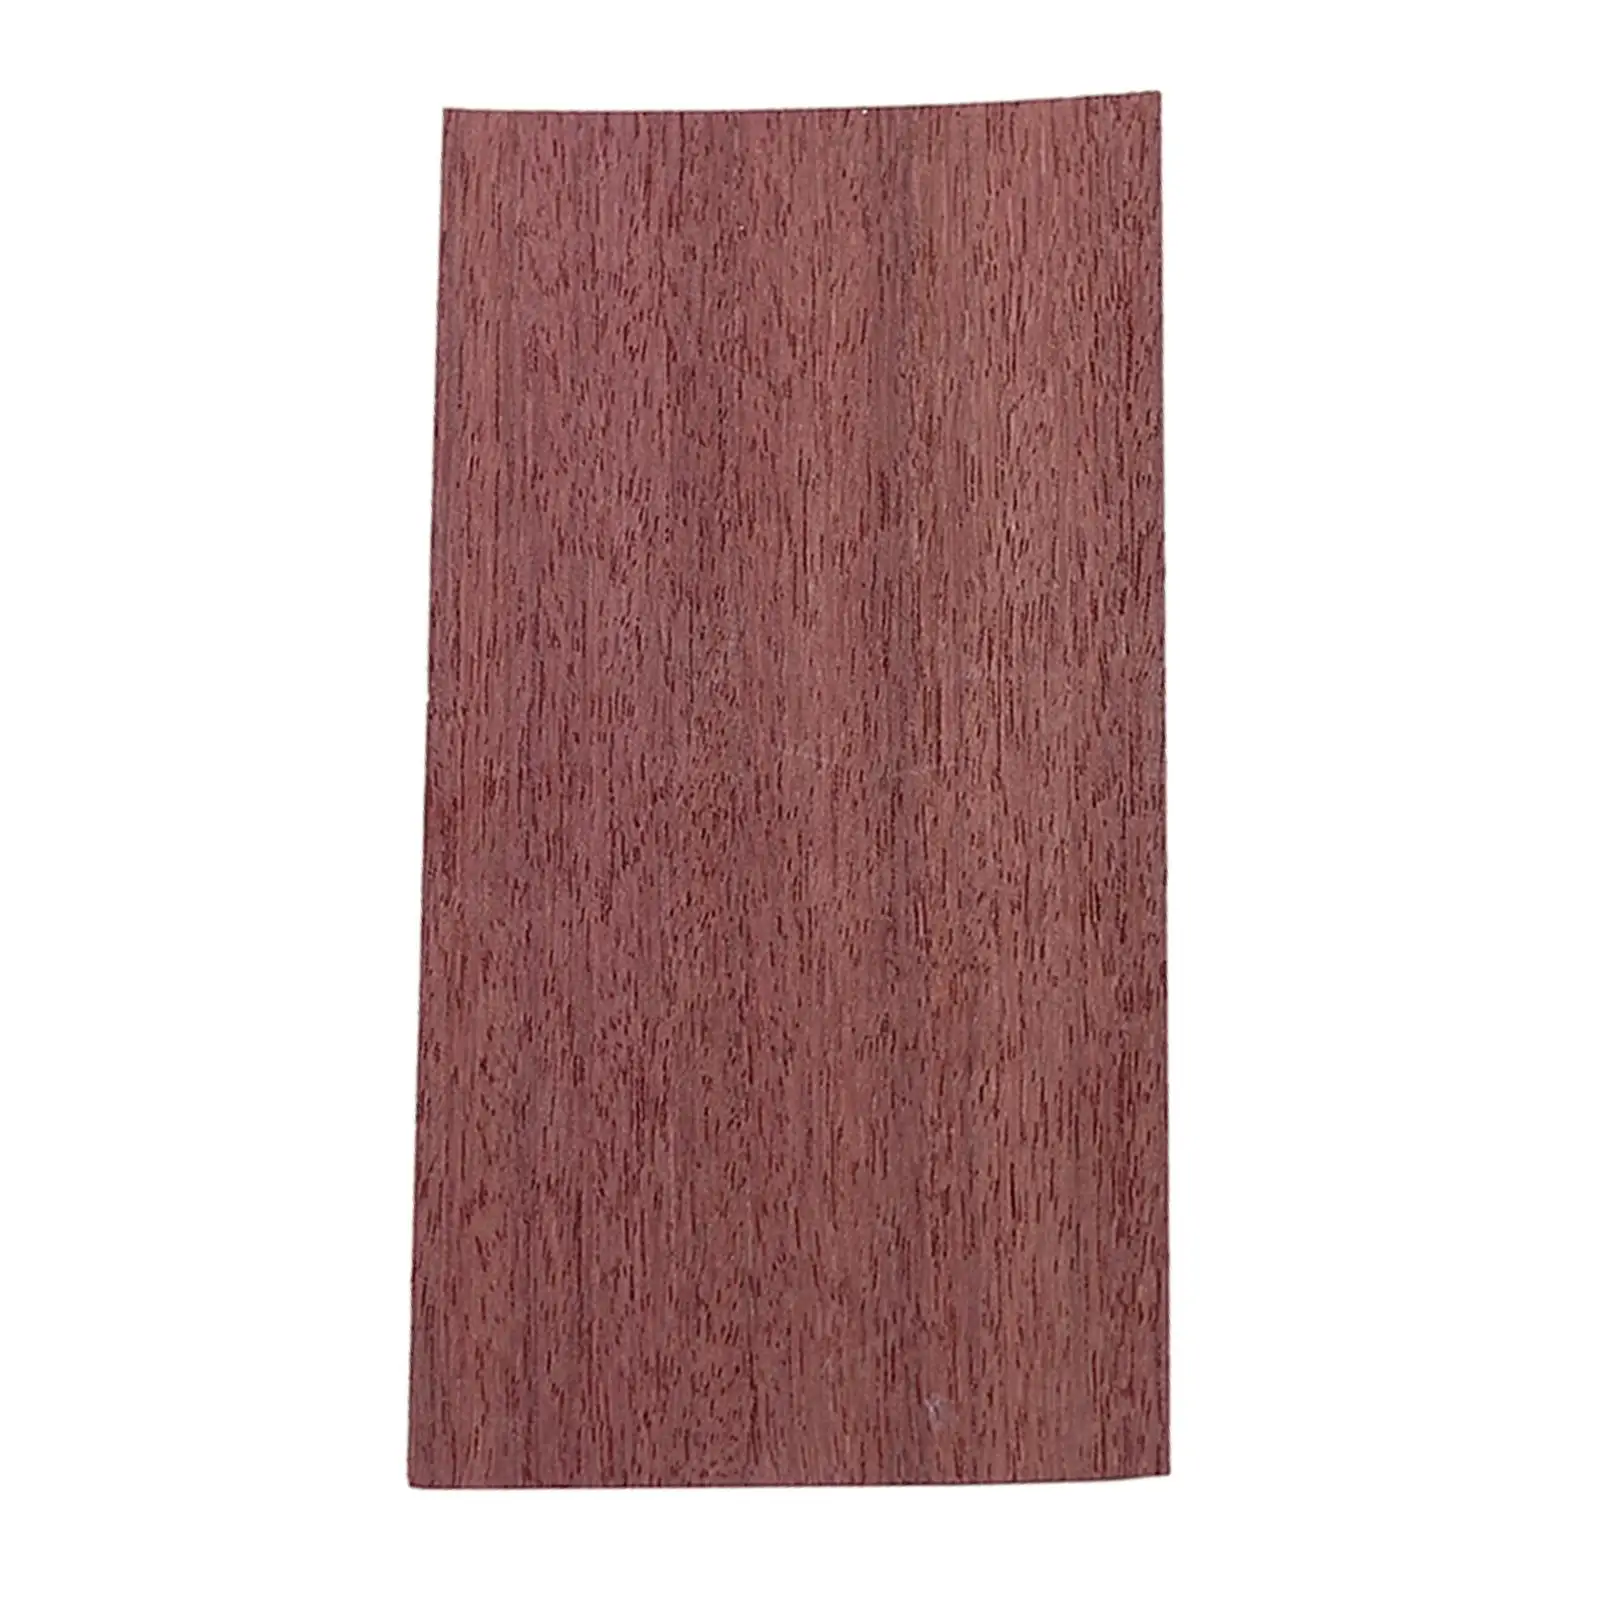 Acoustic head of guitar Veneer Shell Sheet Headstock Decoration accessories Luthier Tool Guitar Instrument 200x90x0.5mm